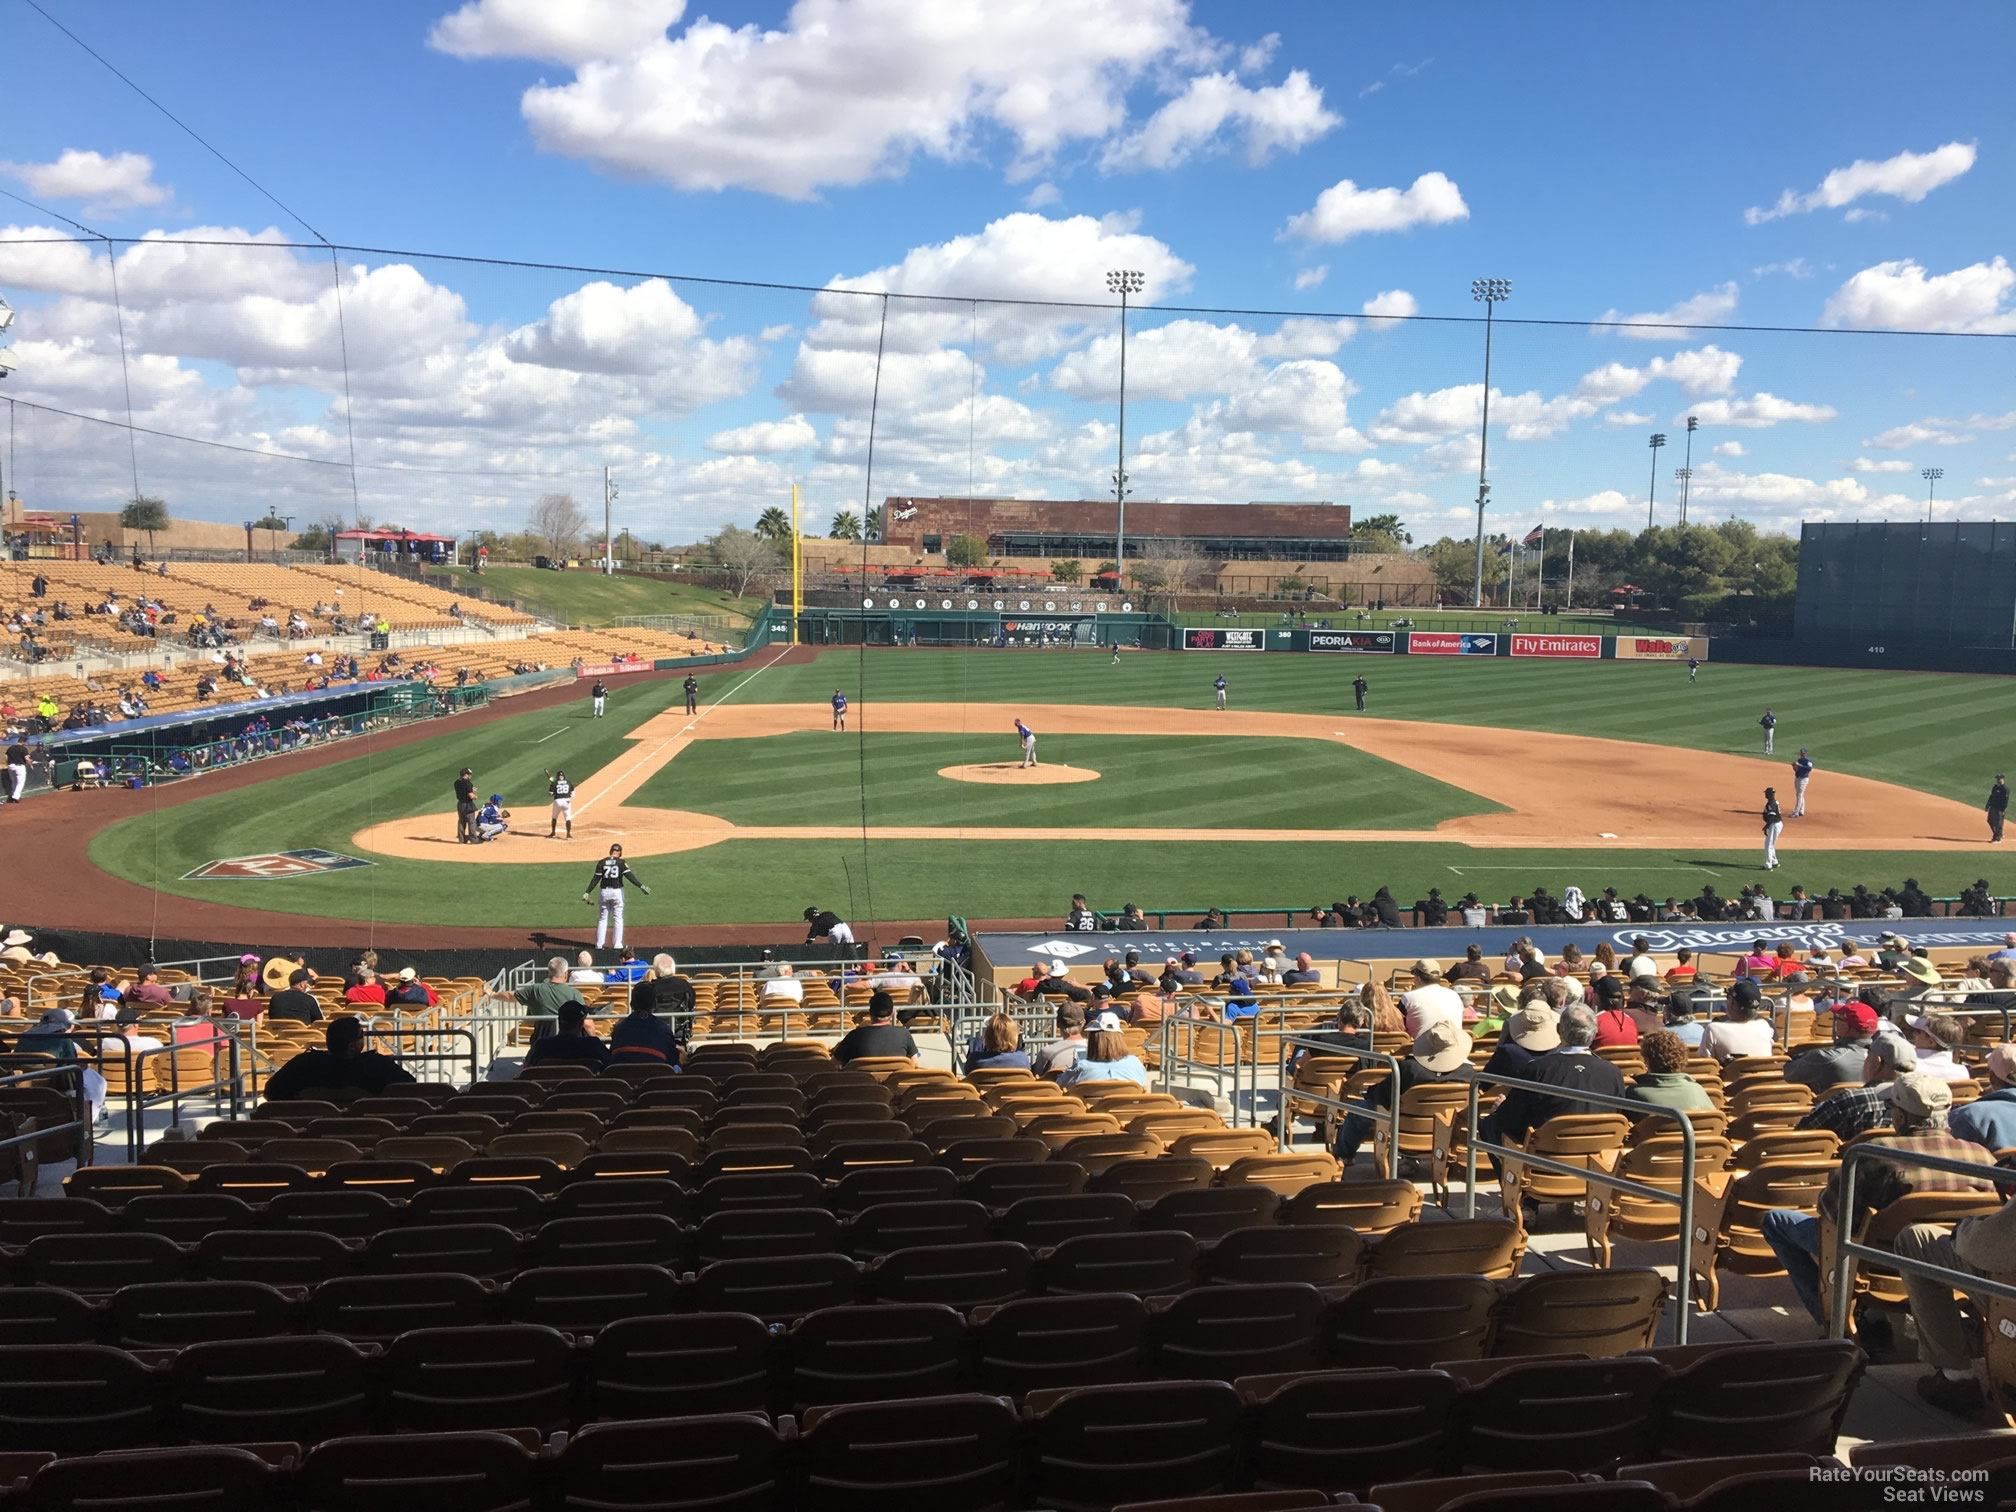 section 111, row 18 seat view  - camelback ranch